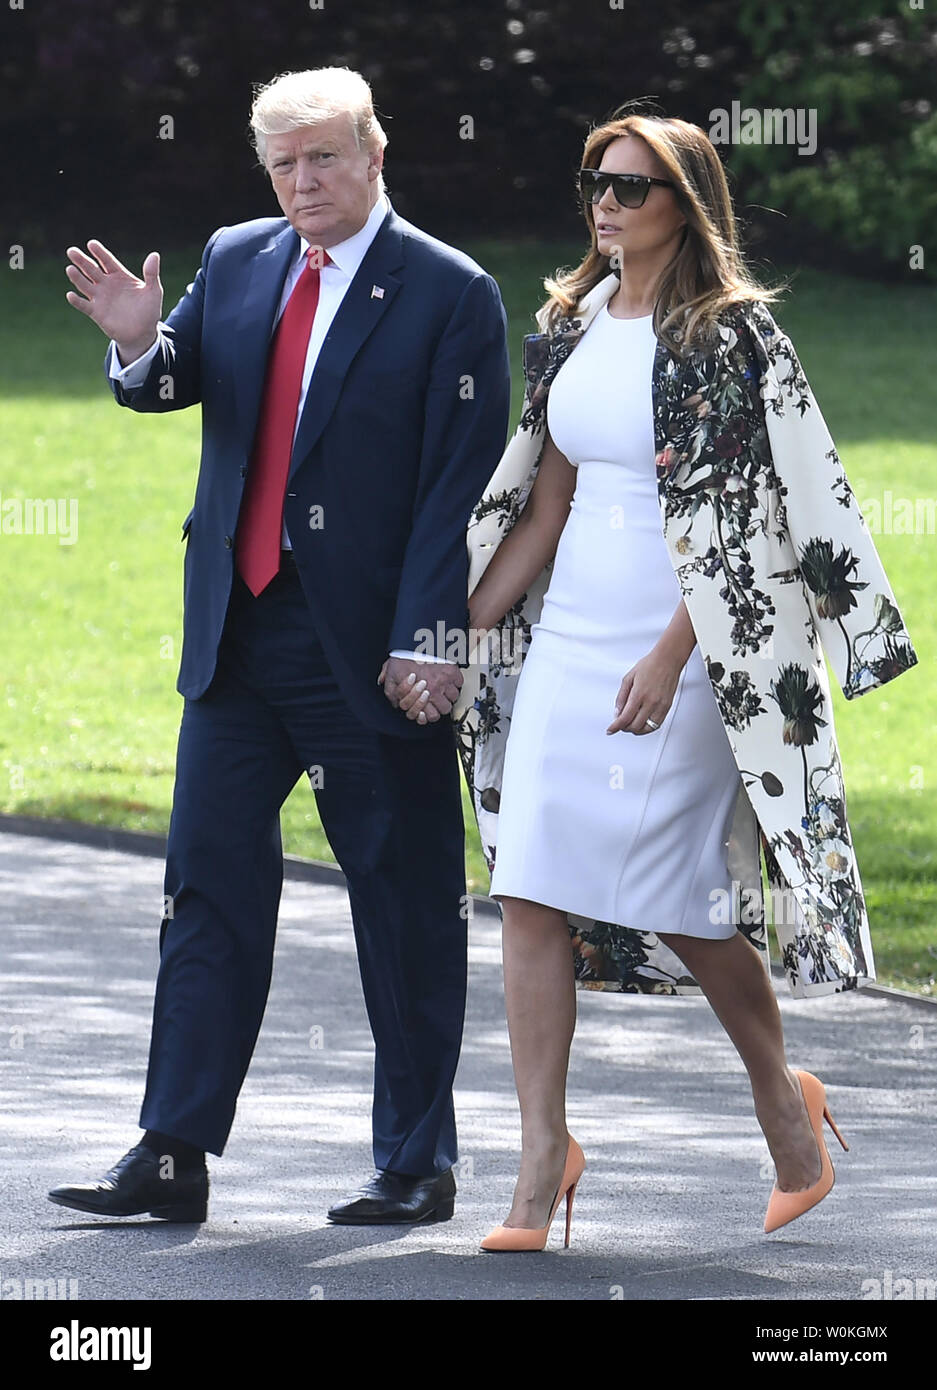 President Donald Trump and First Lady Melania Trump walk hand-in-hand to  Marine One for departure from the White House, April 18, 2019, Washington,  DC. The Trumps will spend Easter weekend at the